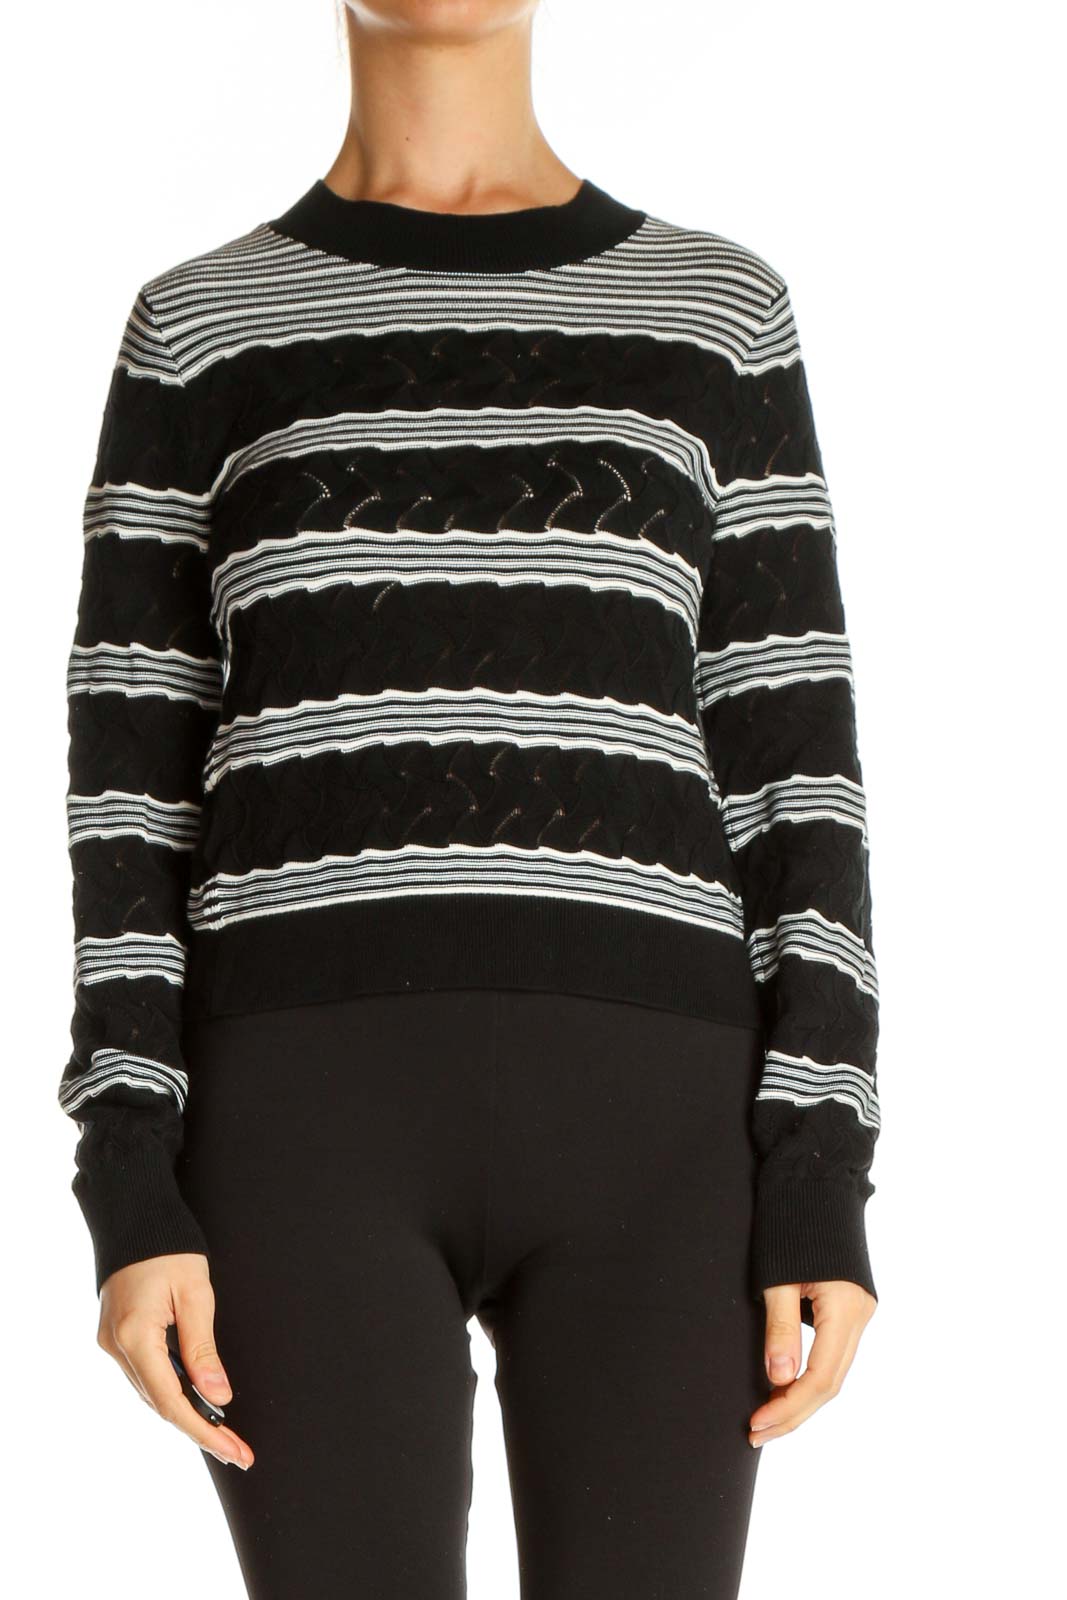 Black Striped Chic Sweater Front